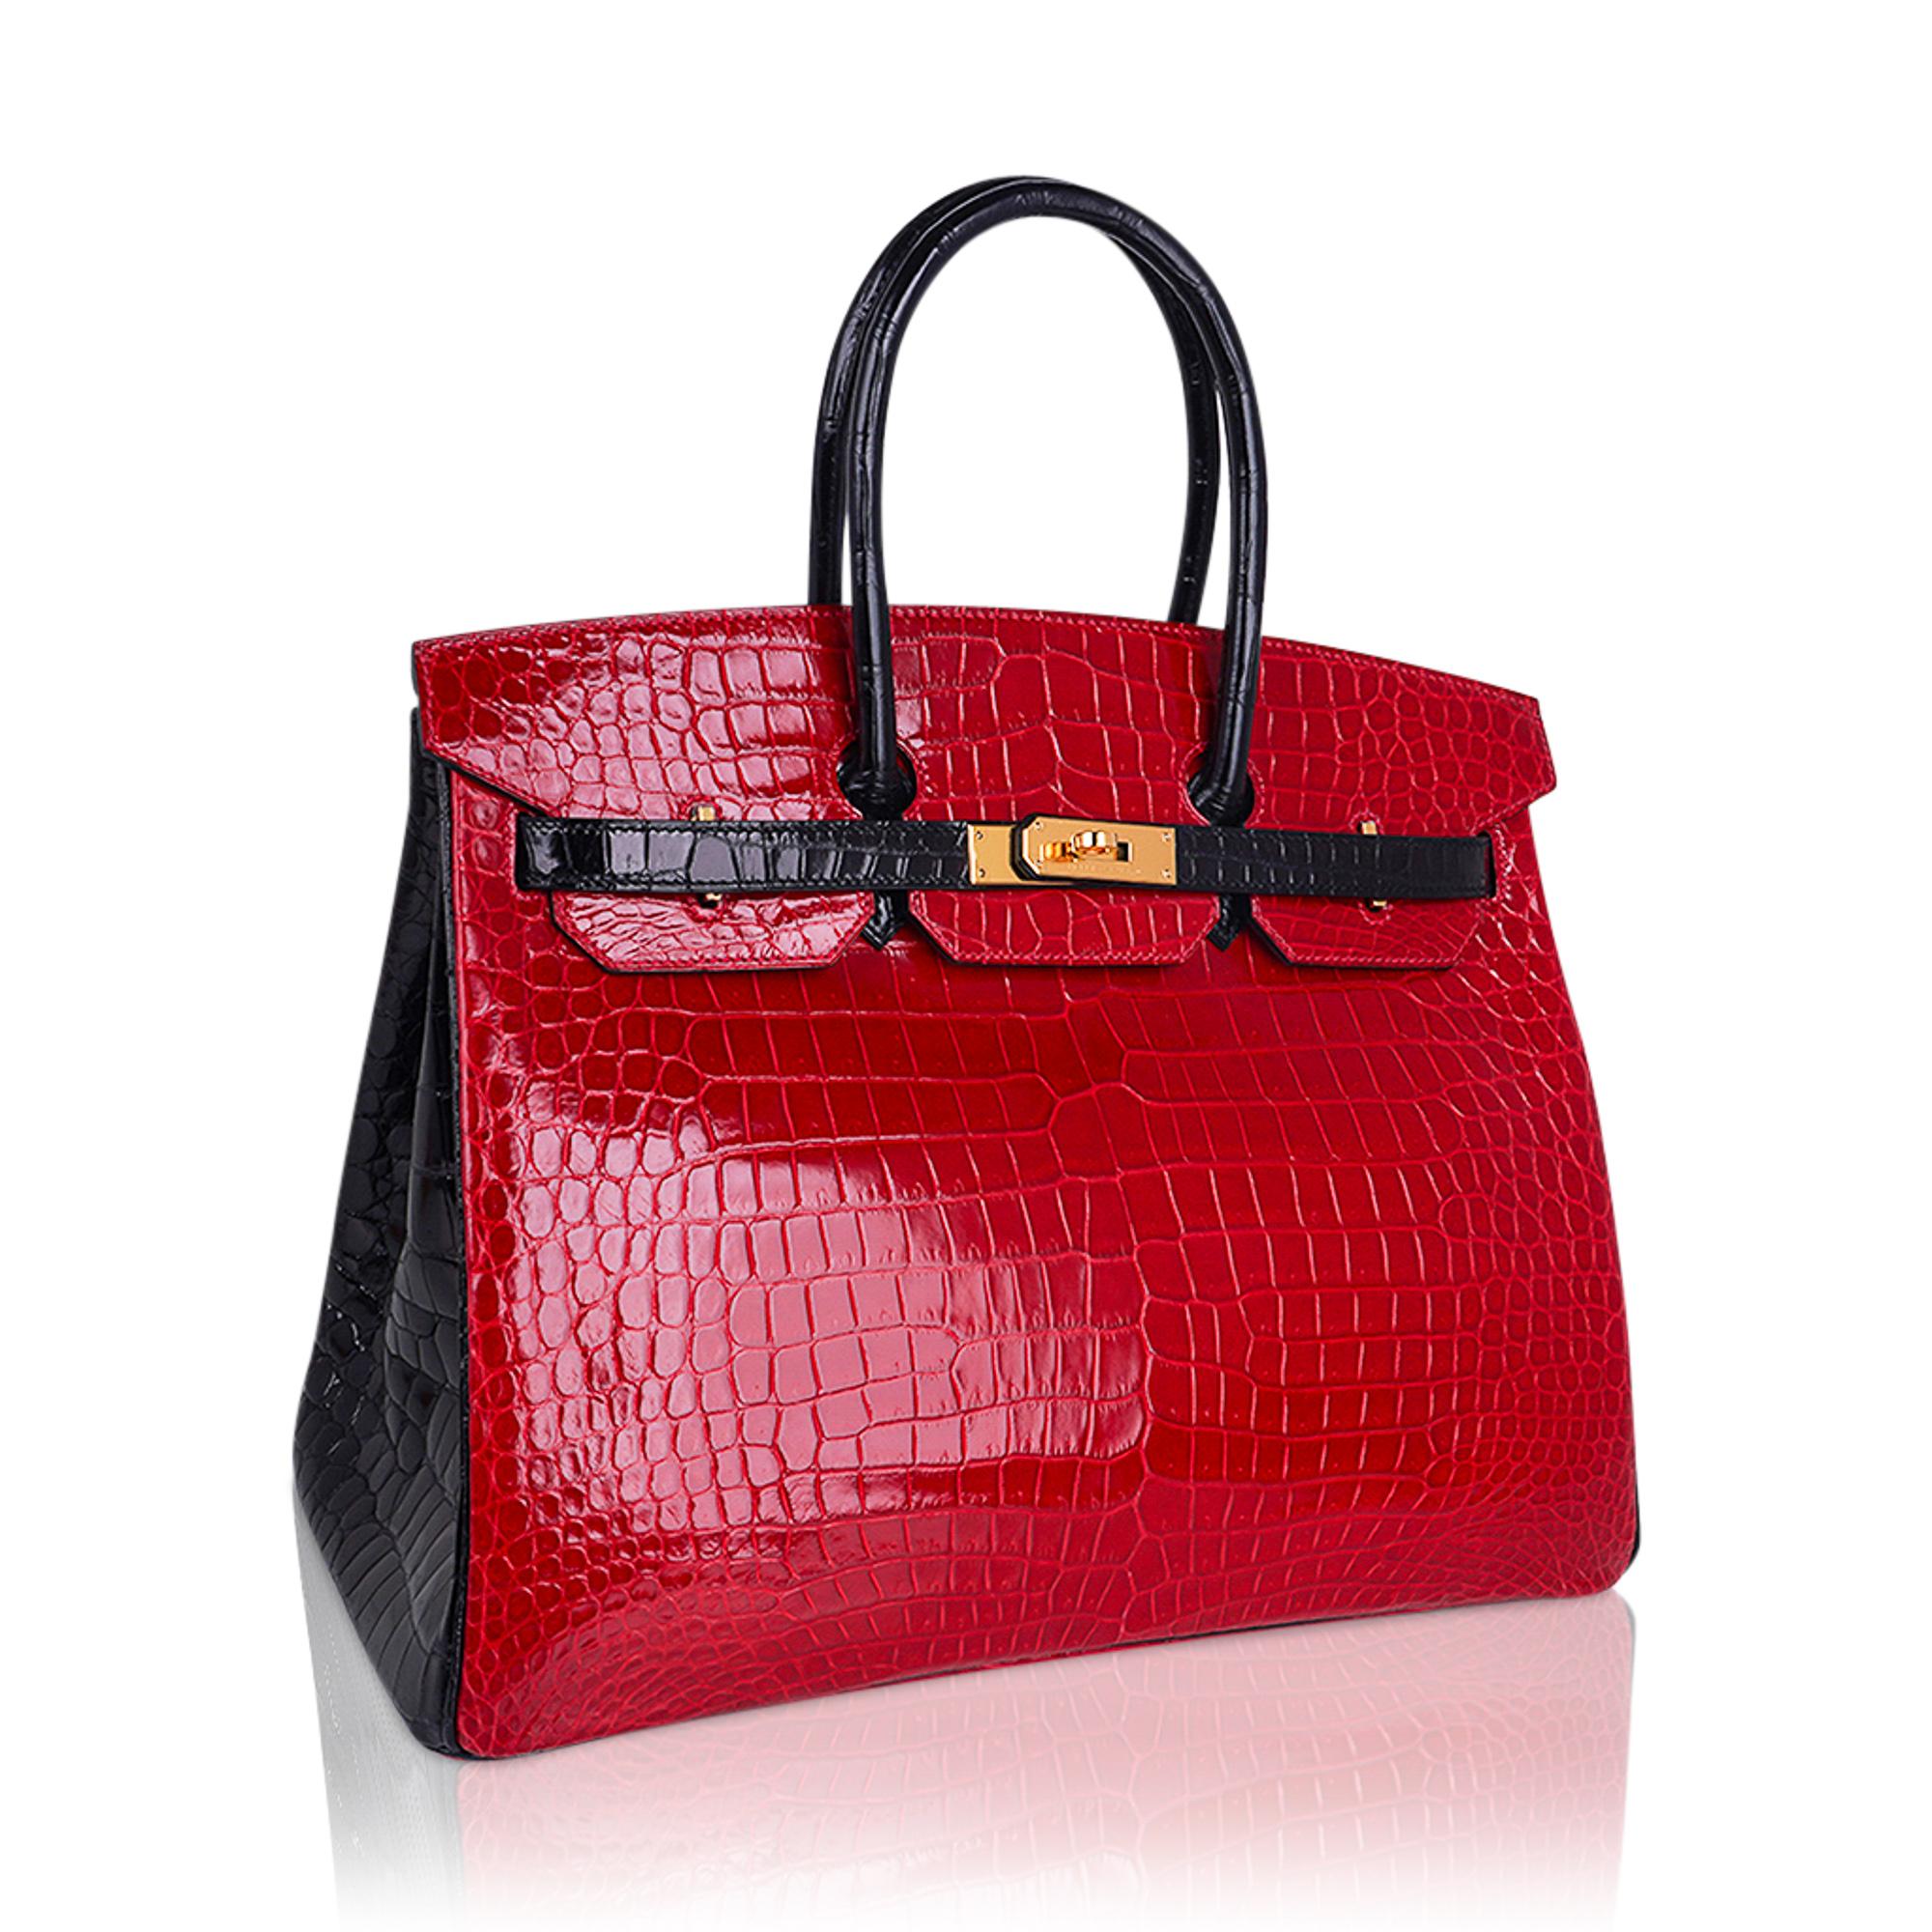 Mightychic offers a dramatic Hermes Birkin HSS 35 bag featured in Braise and Black porosus crocodile. 
This extraordinarylimited edition Hermes Birkin bag is simply show stopping.
Lush gold hardware.
Black interior.
This bag is in superior